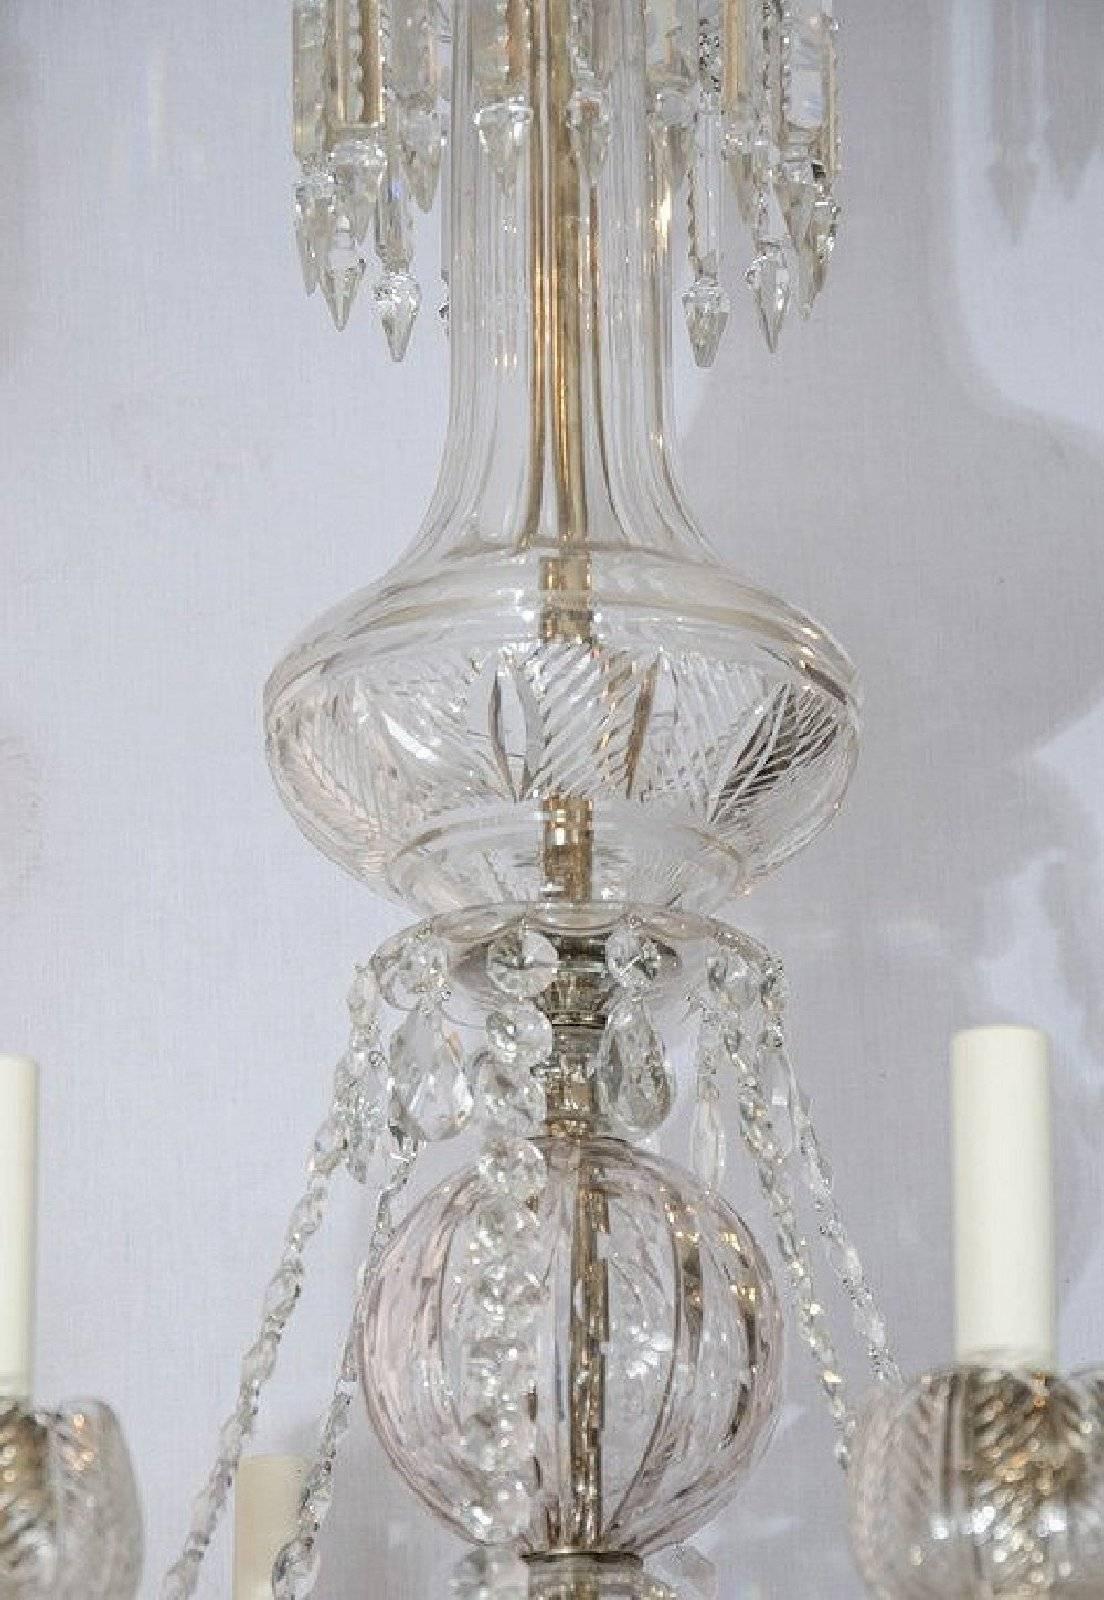 This stunning large Regency style chandelier features handmade glass crystals on two tiers and candle style light fittings set inside glass ‘cupped’ shaped holders with leaf detail decoration. The top tier has 6 arms and the bottom tier has 6, on an